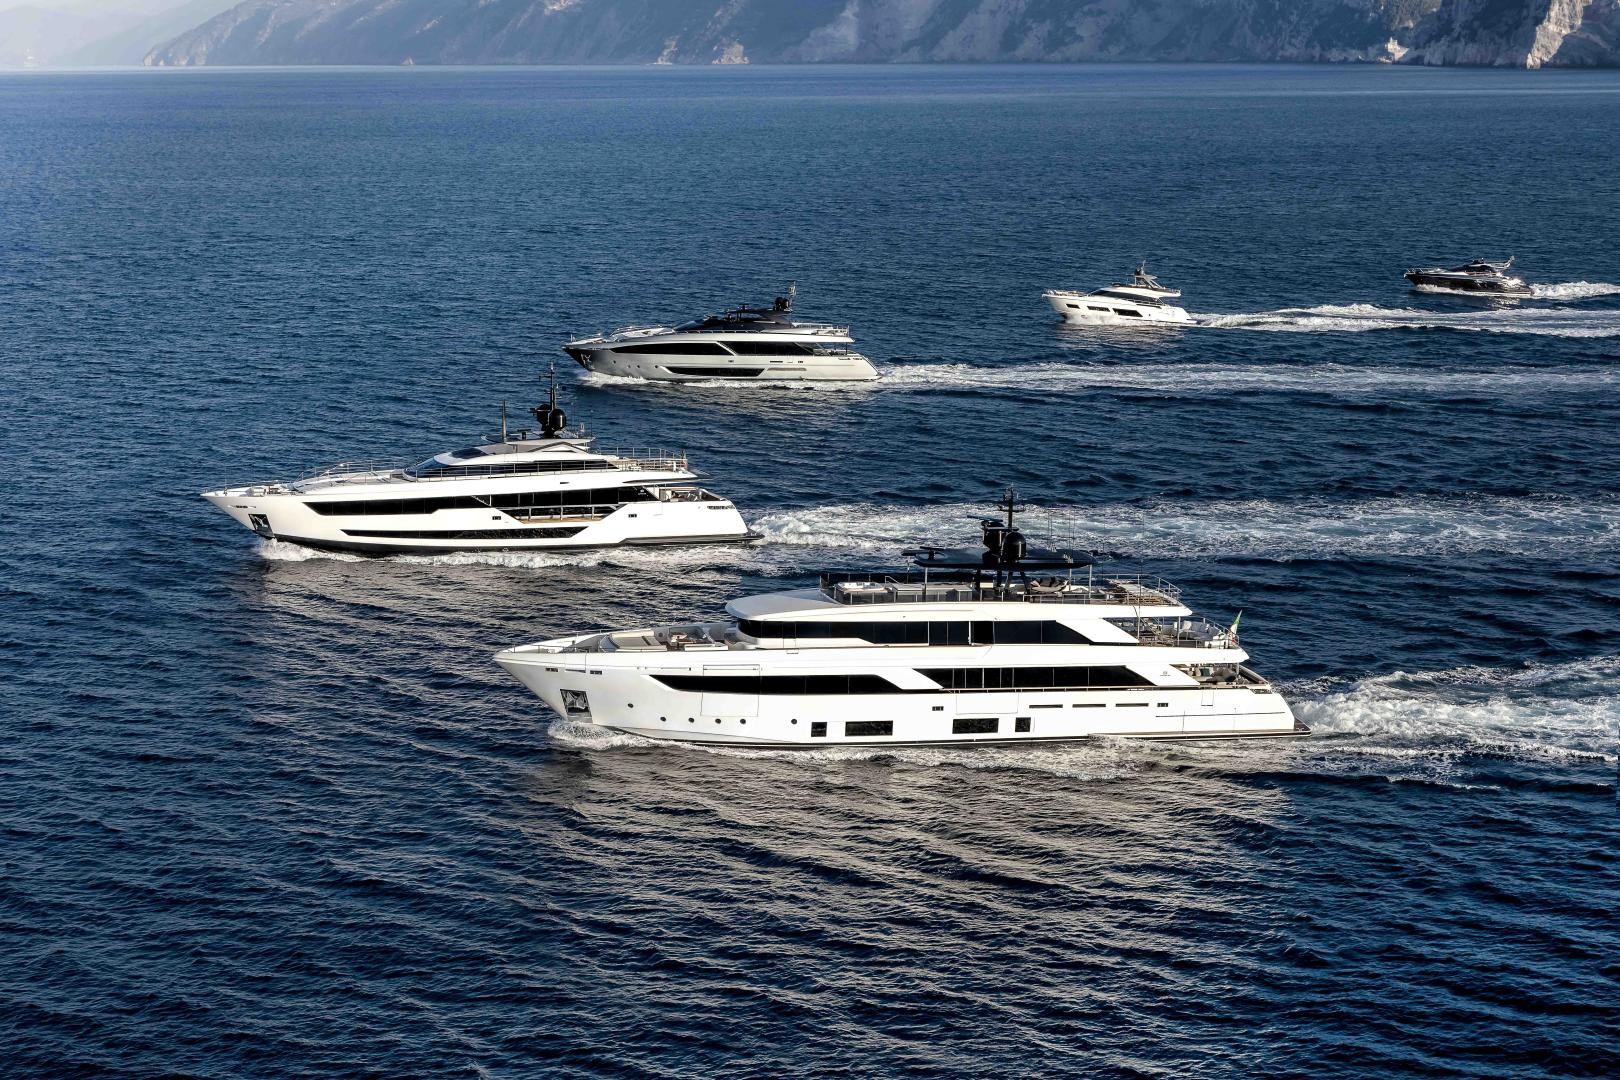 The Ferretti Group's fleet of 18 magnificent yachts